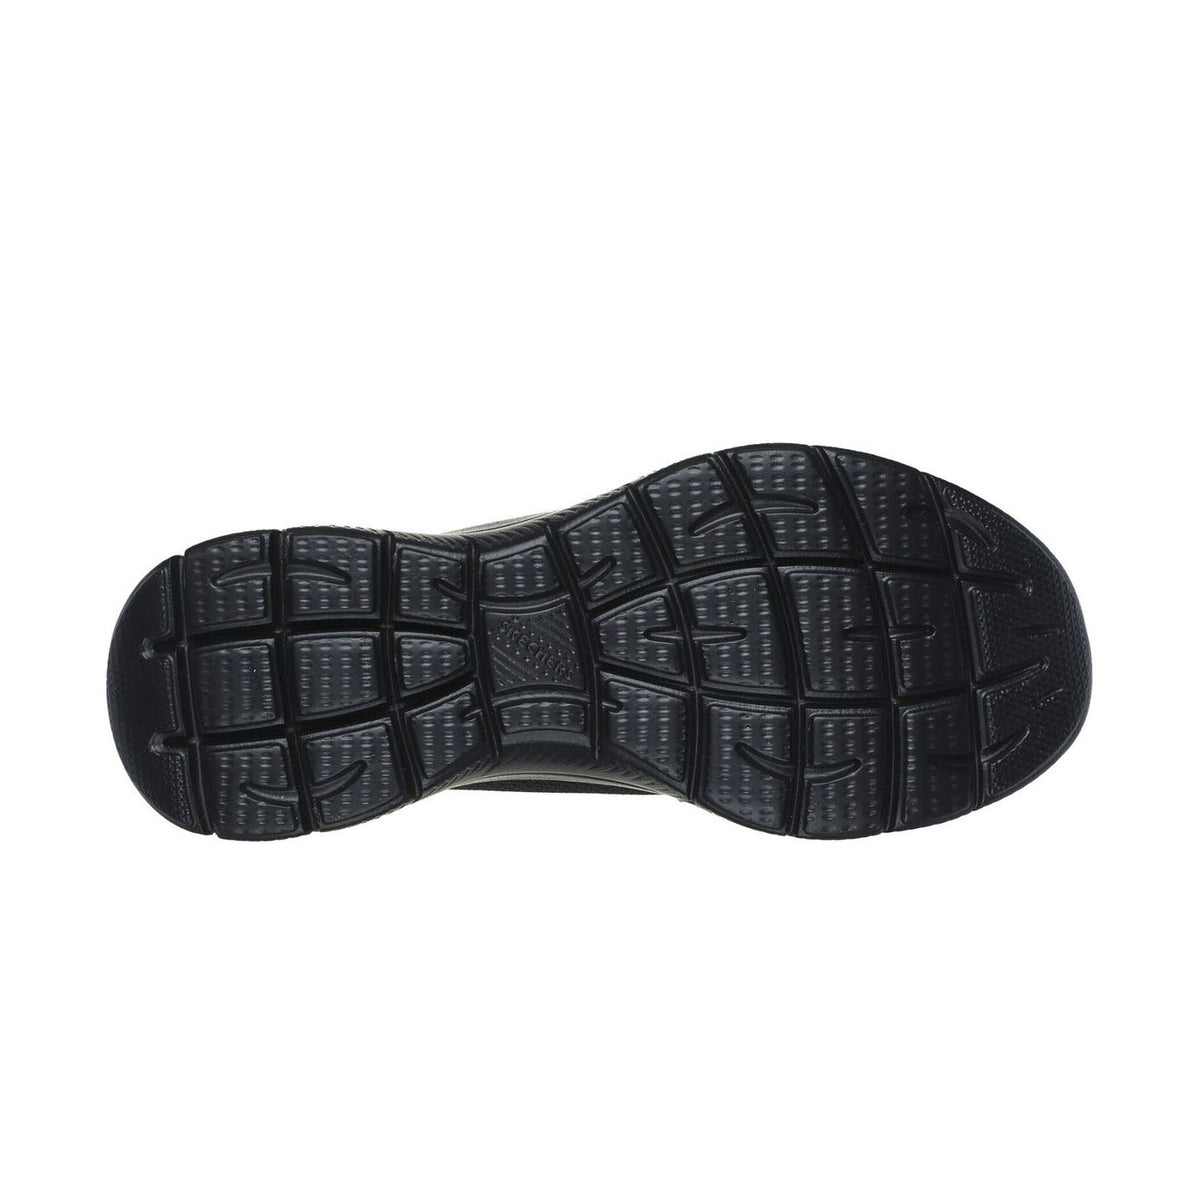 Bottom view of a SKECHERS SLIP-INS SUMMITS DIAMOND DREAM ALL BLACK - WOMENS sole with a detailed tread pattern and superior cushioning.